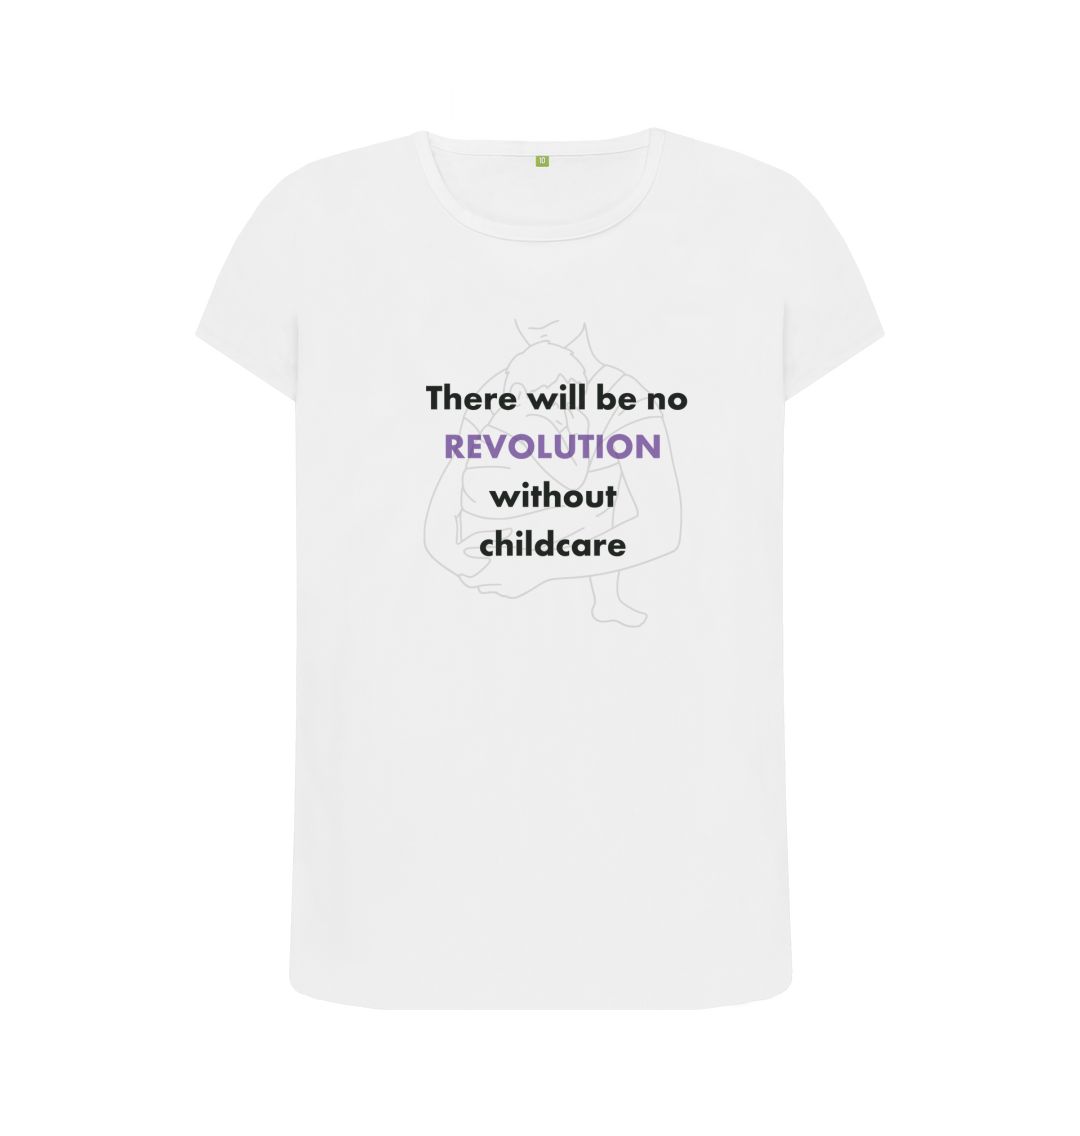 White Feminist T shirt - There will be no revolution without childcare